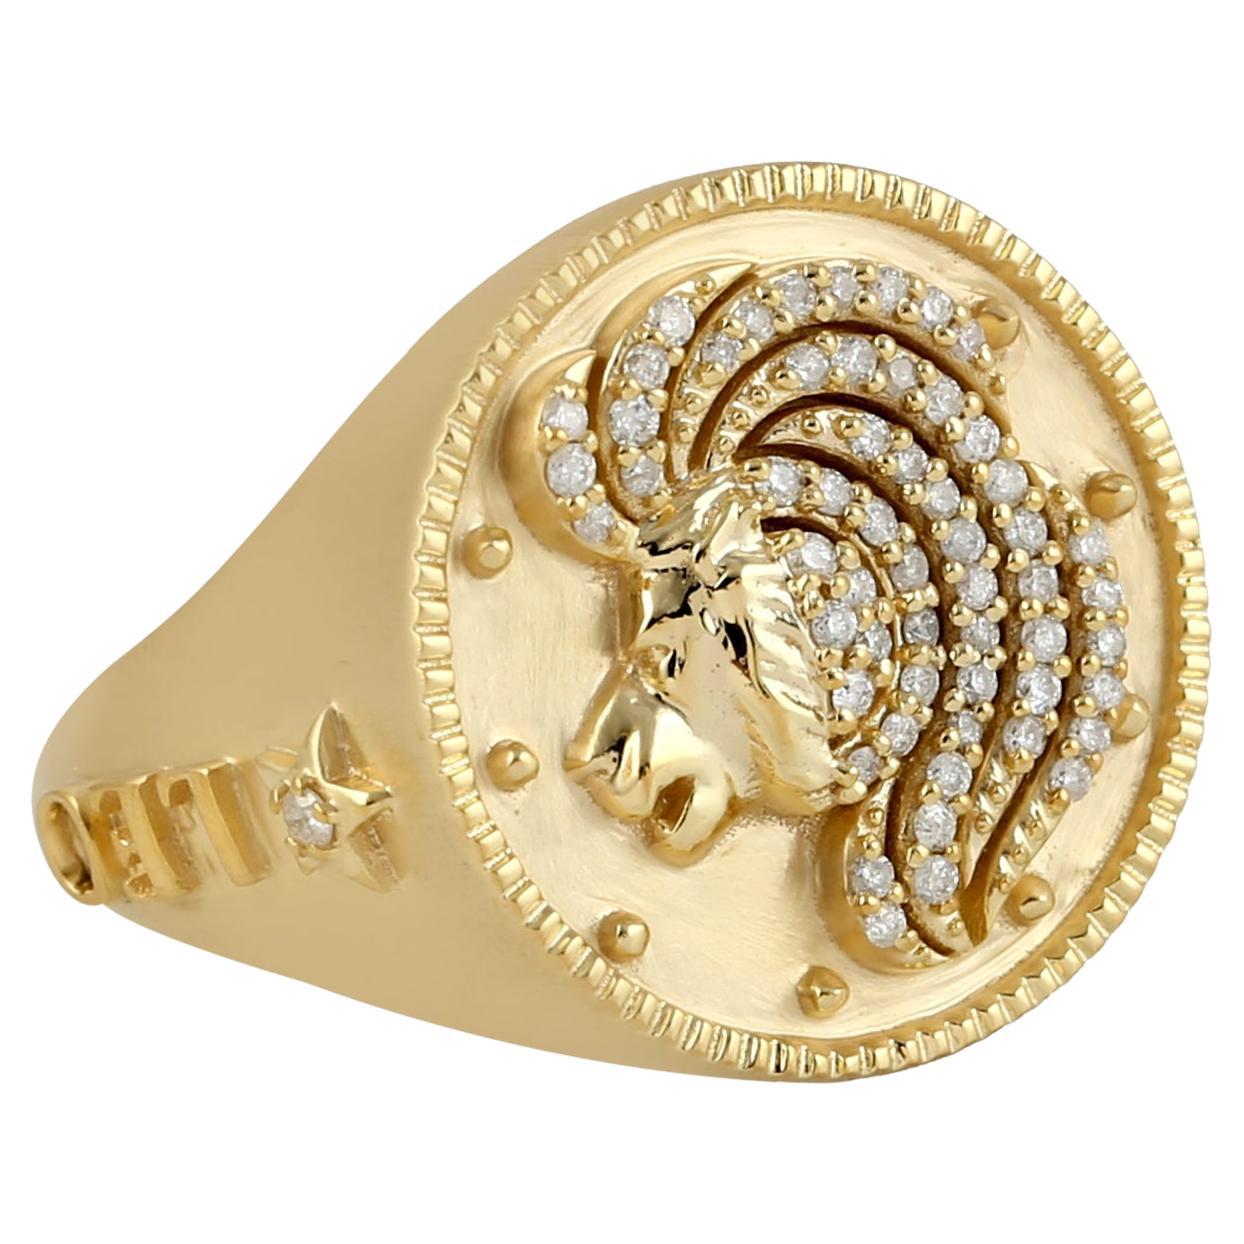 Leo Zodiac 14K Designer Gold Ring With Pave Diamond Setting For Sale